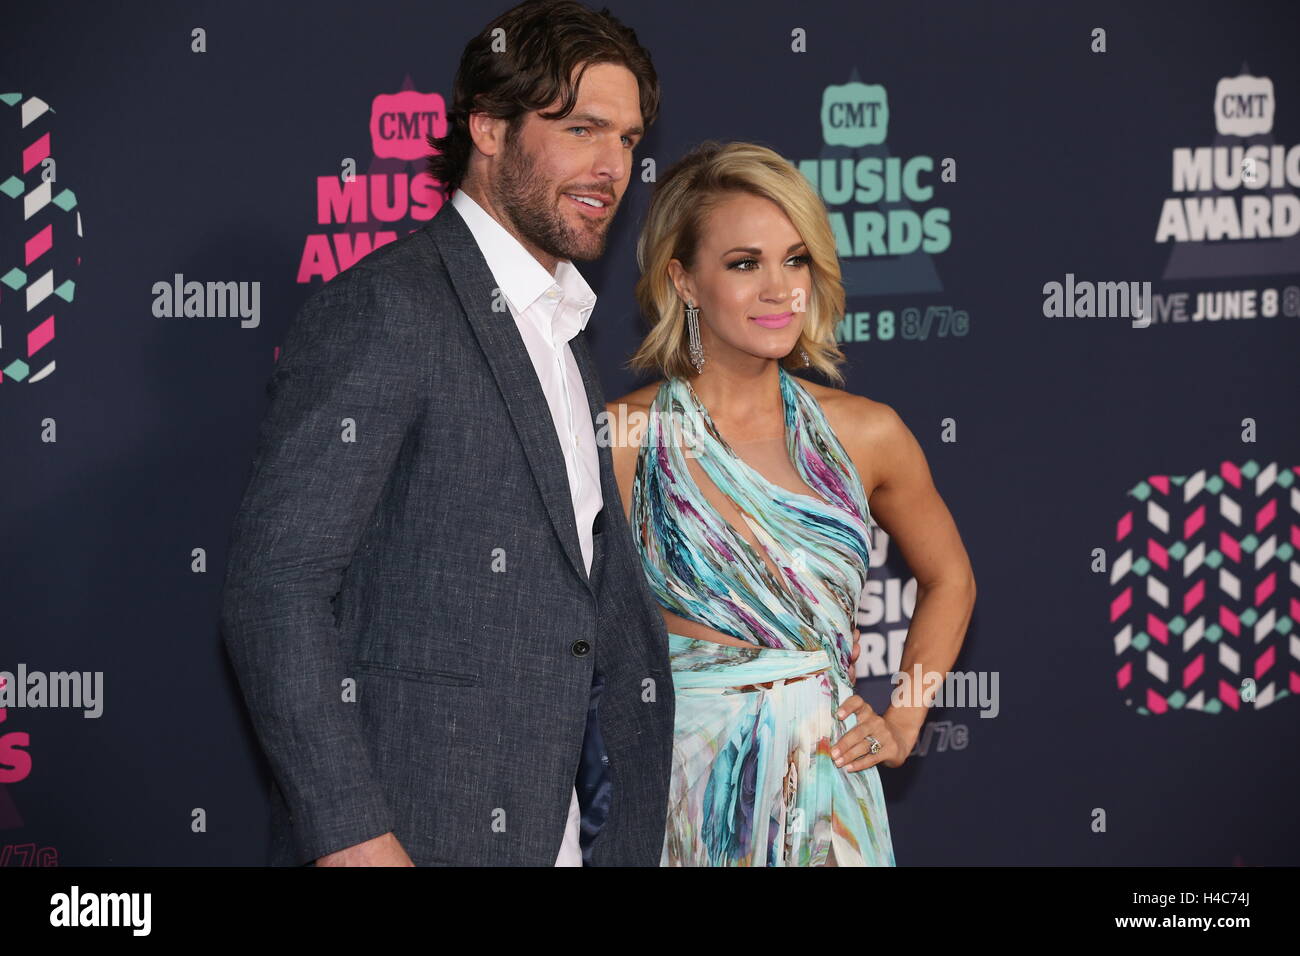 Carrie Underwood Walks Carpet with Husband Mike Fisher at CMA